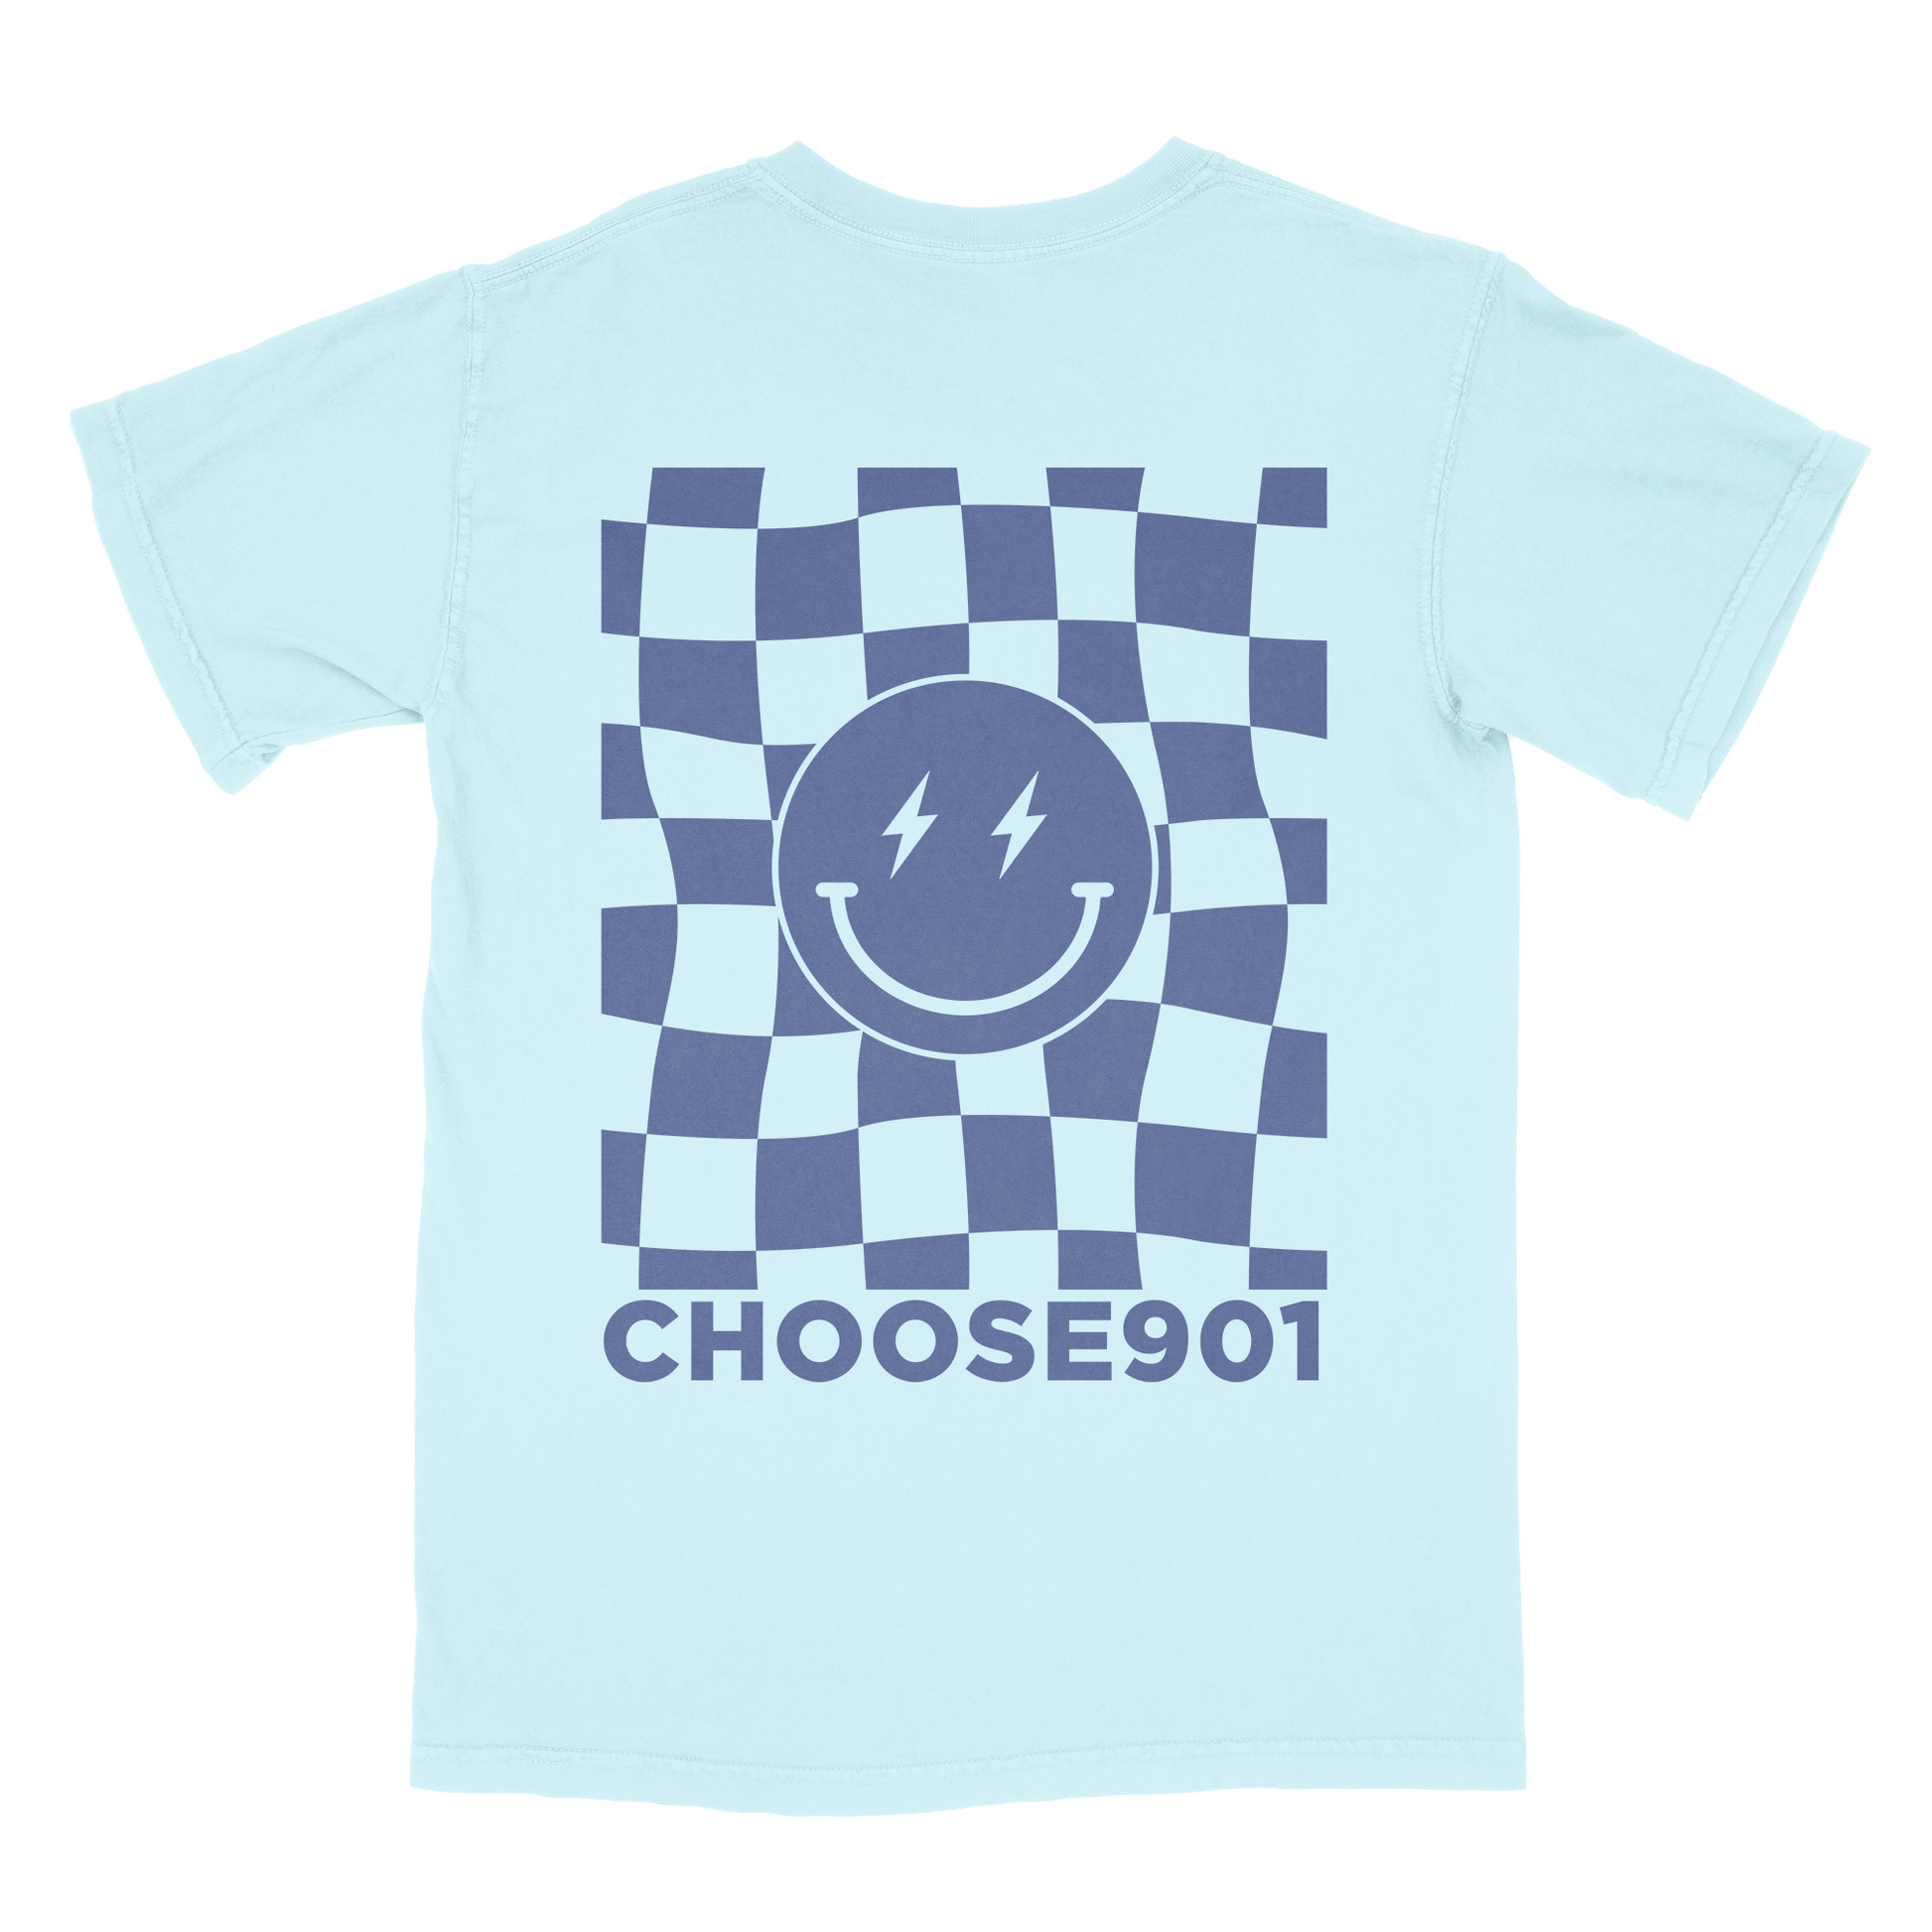 Light blue printed shirt with a black and white checkered circle logo featuring a smiling face and lightning bolts, and text "Choose901 Lightning Smiley on Chambray" below.